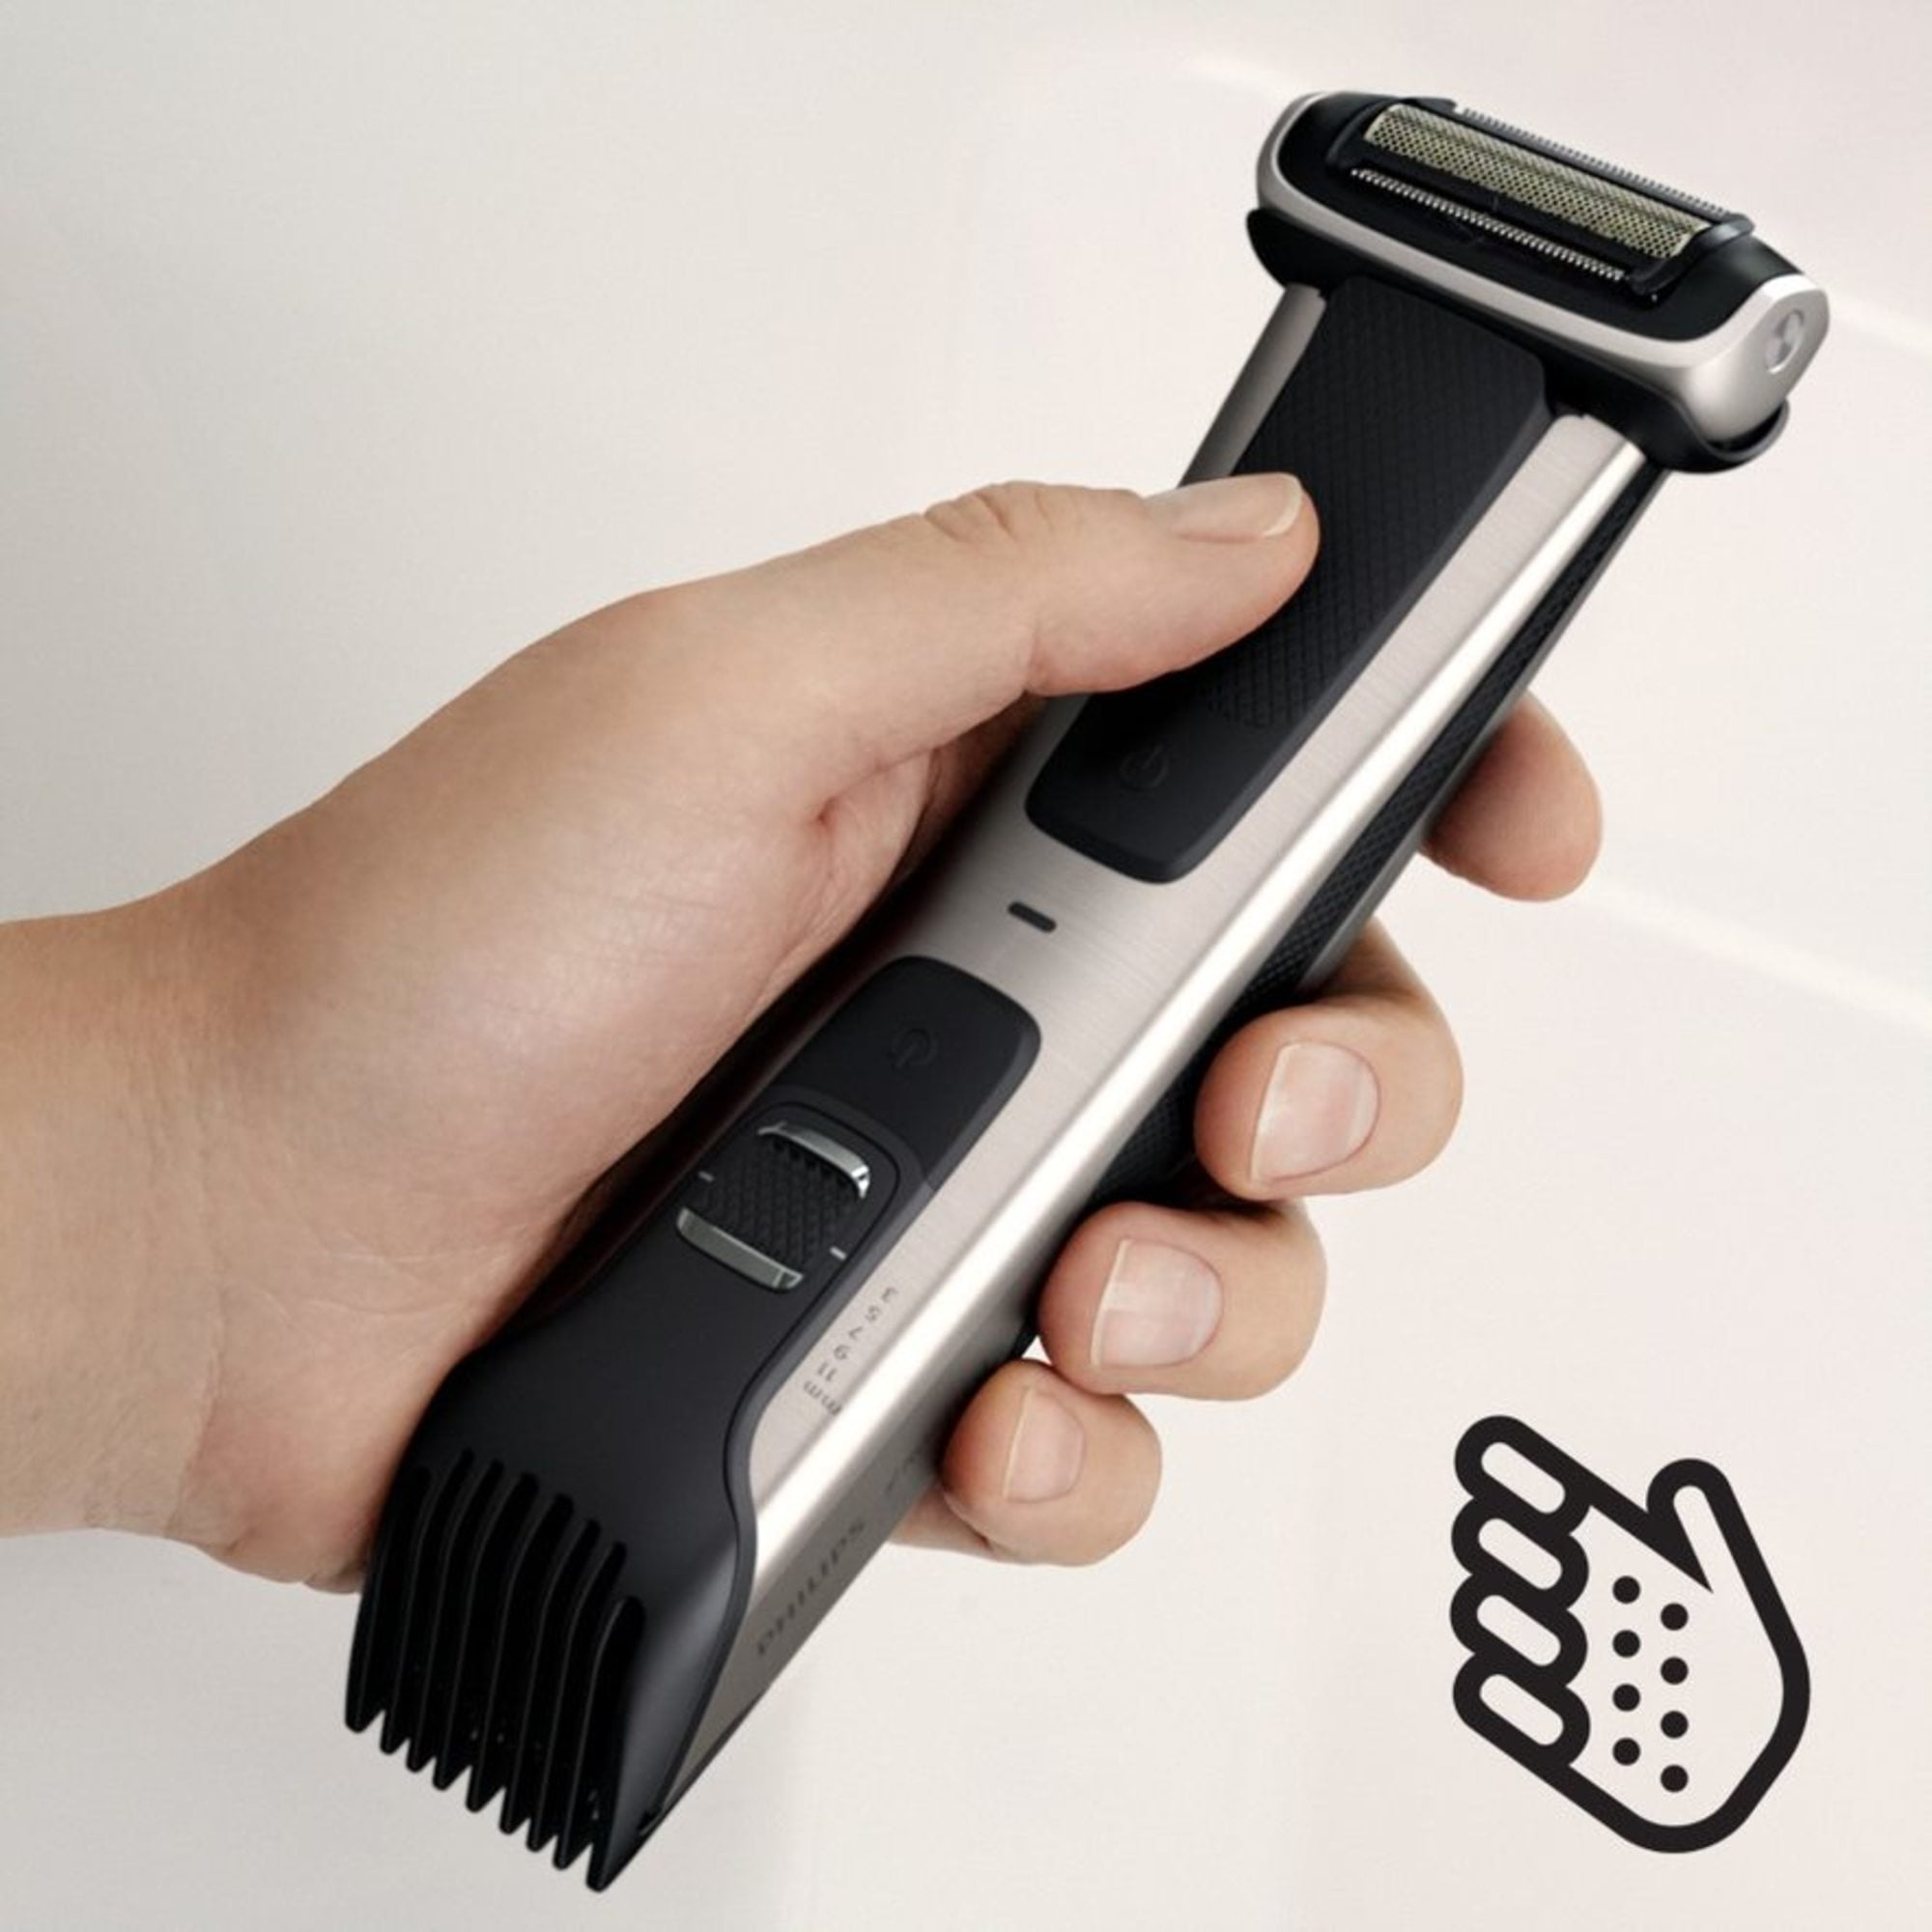 norelco body hair trimmer